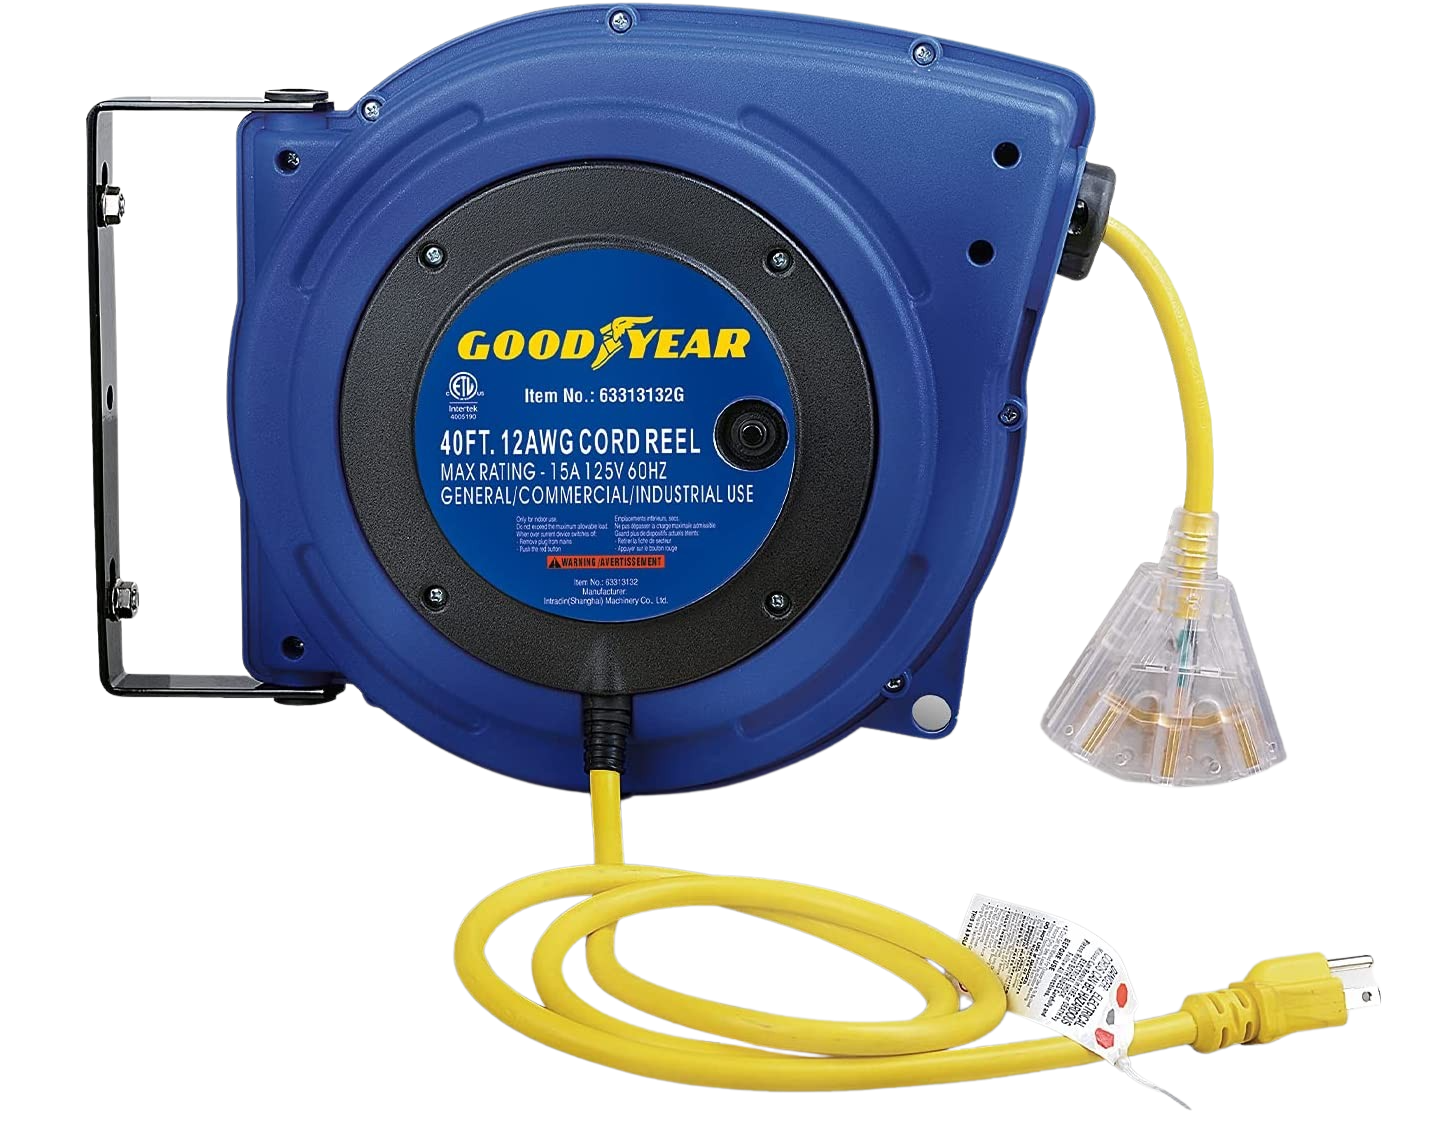 Goodyear, Goodyear 12 AWG x 40' Retractable Extension Cord Reel New